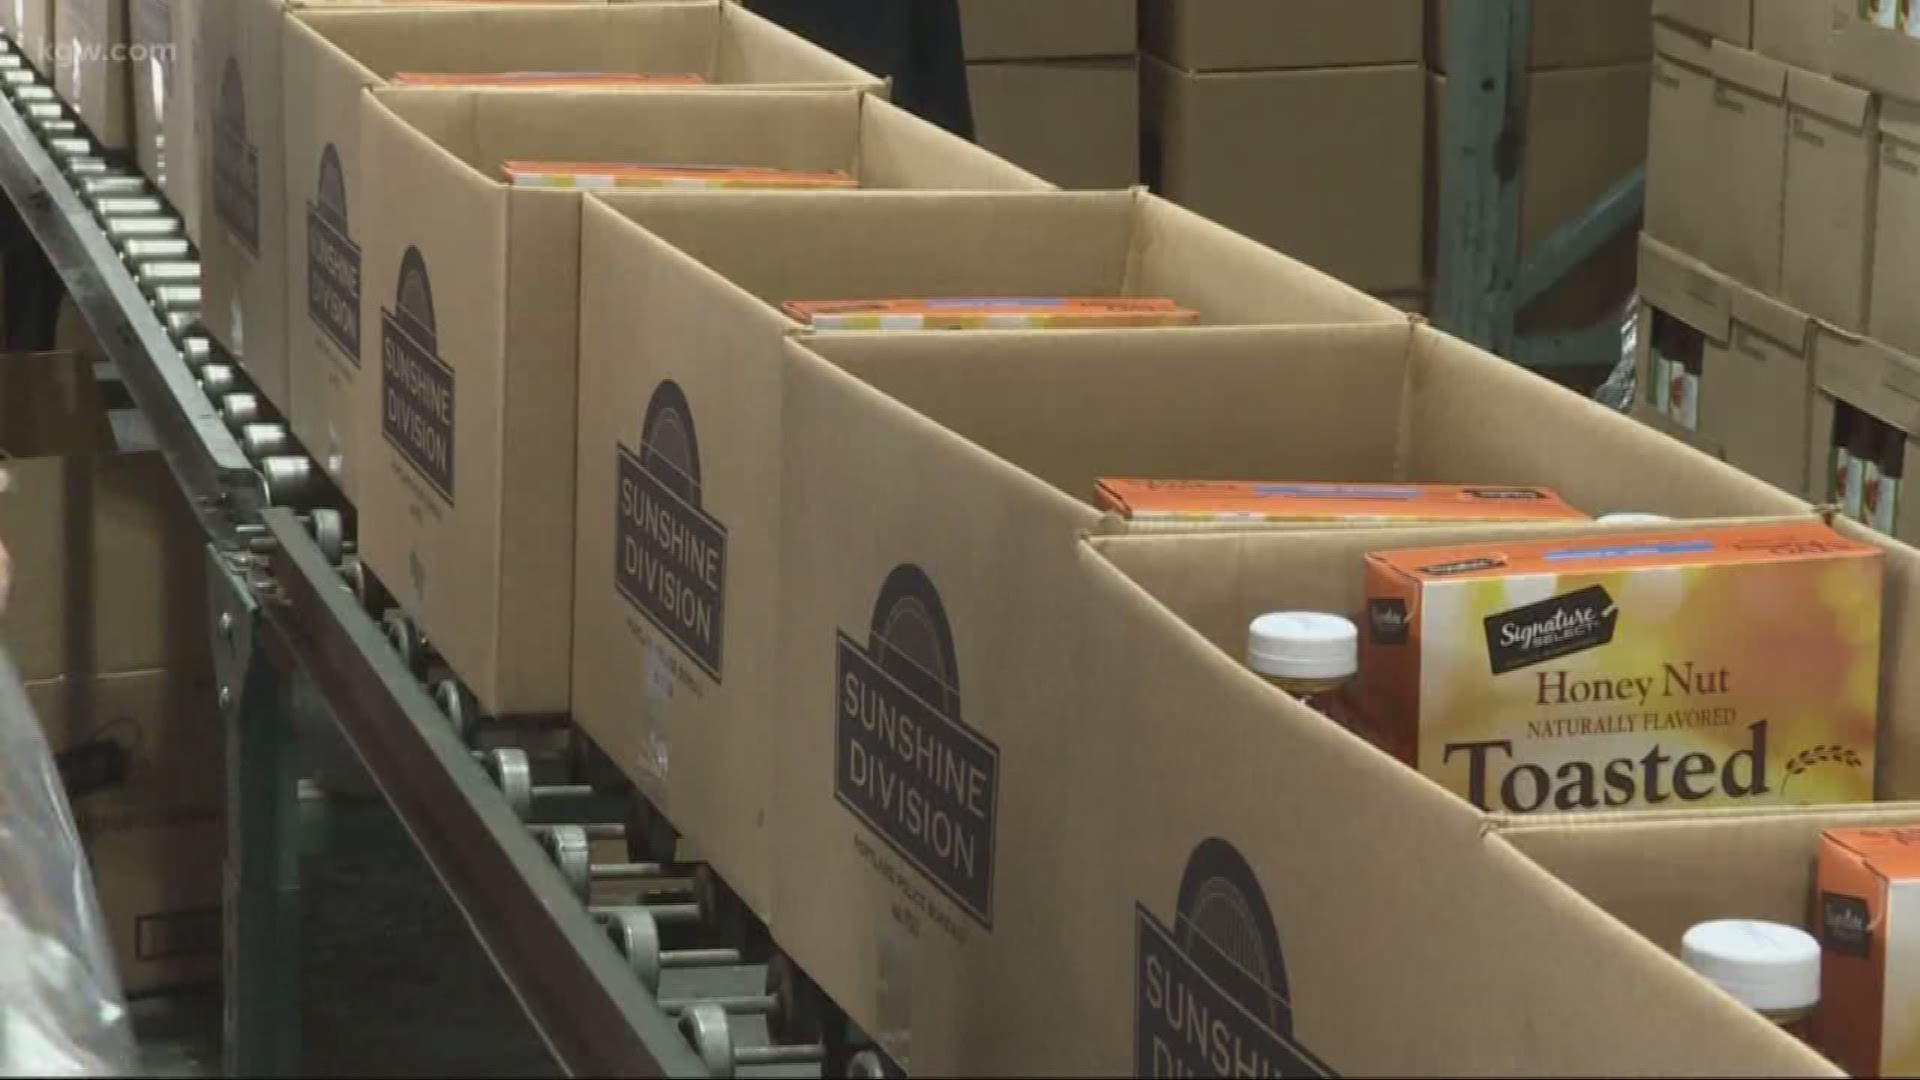 The Portland Police Bureau Sunshine Division, Advantis Credit Union and Safeway volunteers prepared food boxes as part of program to feed hungry students through the summer.